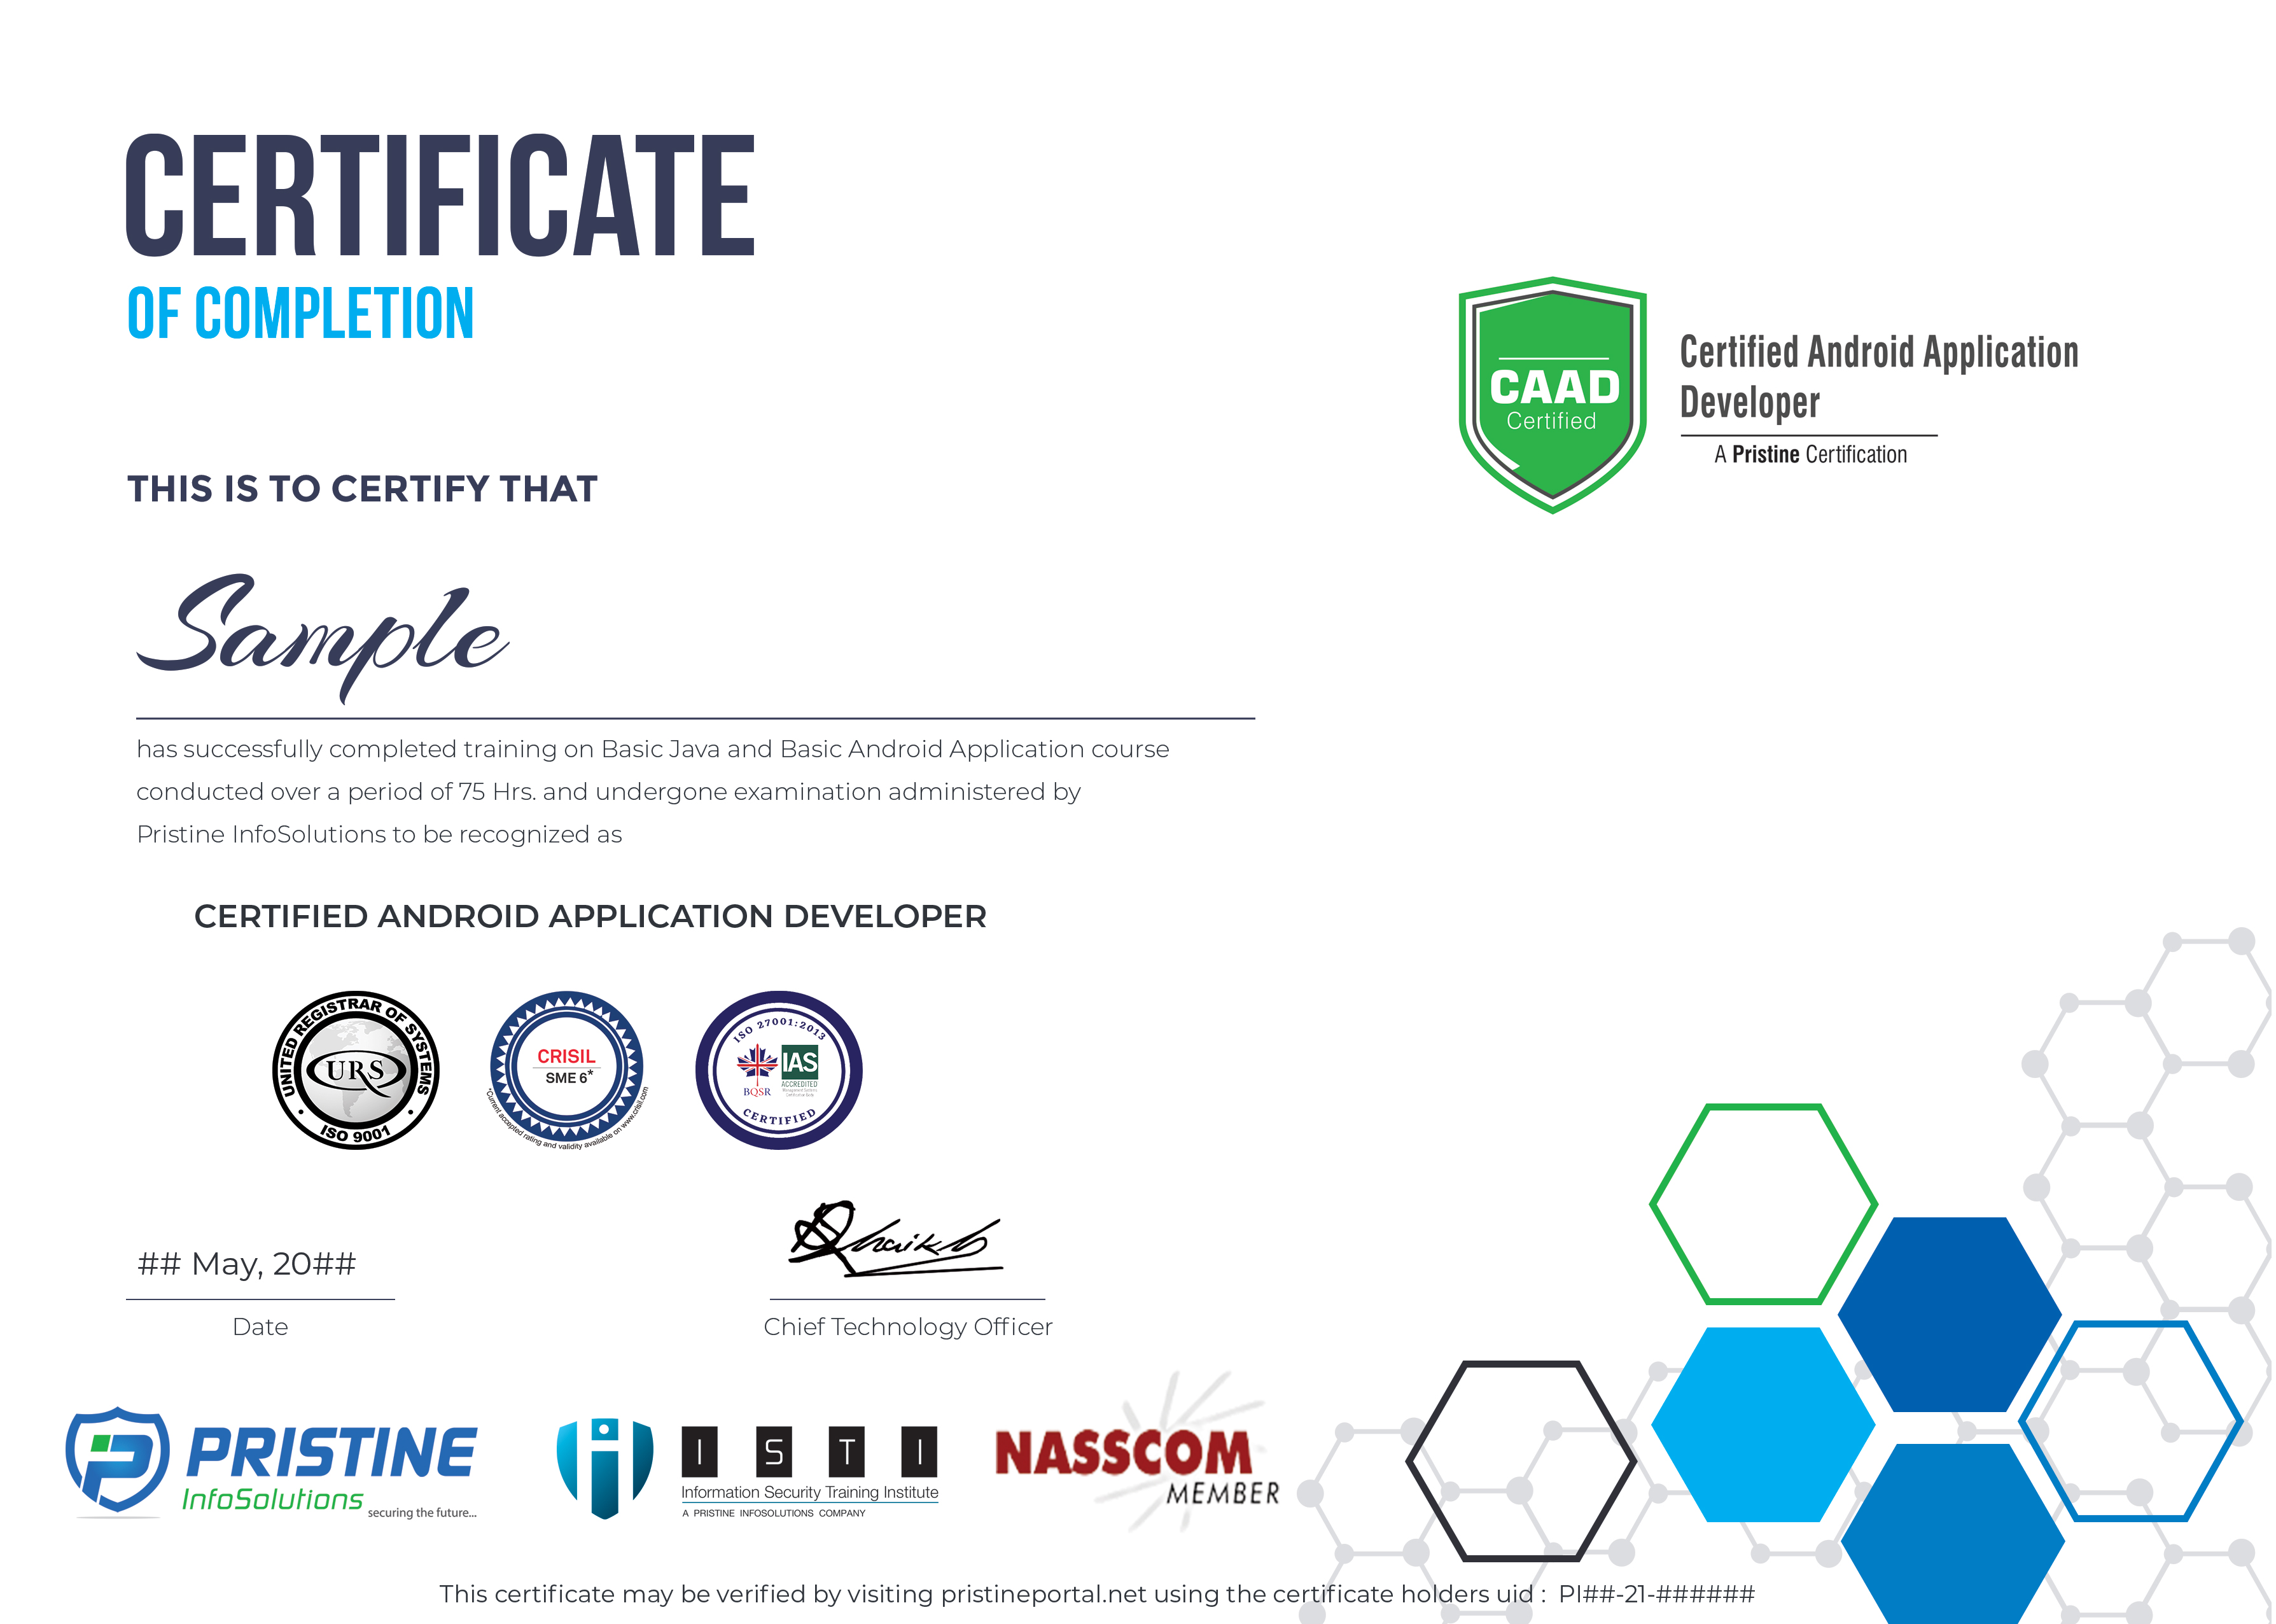 certified android application development sample certificate ho basic java & basic android